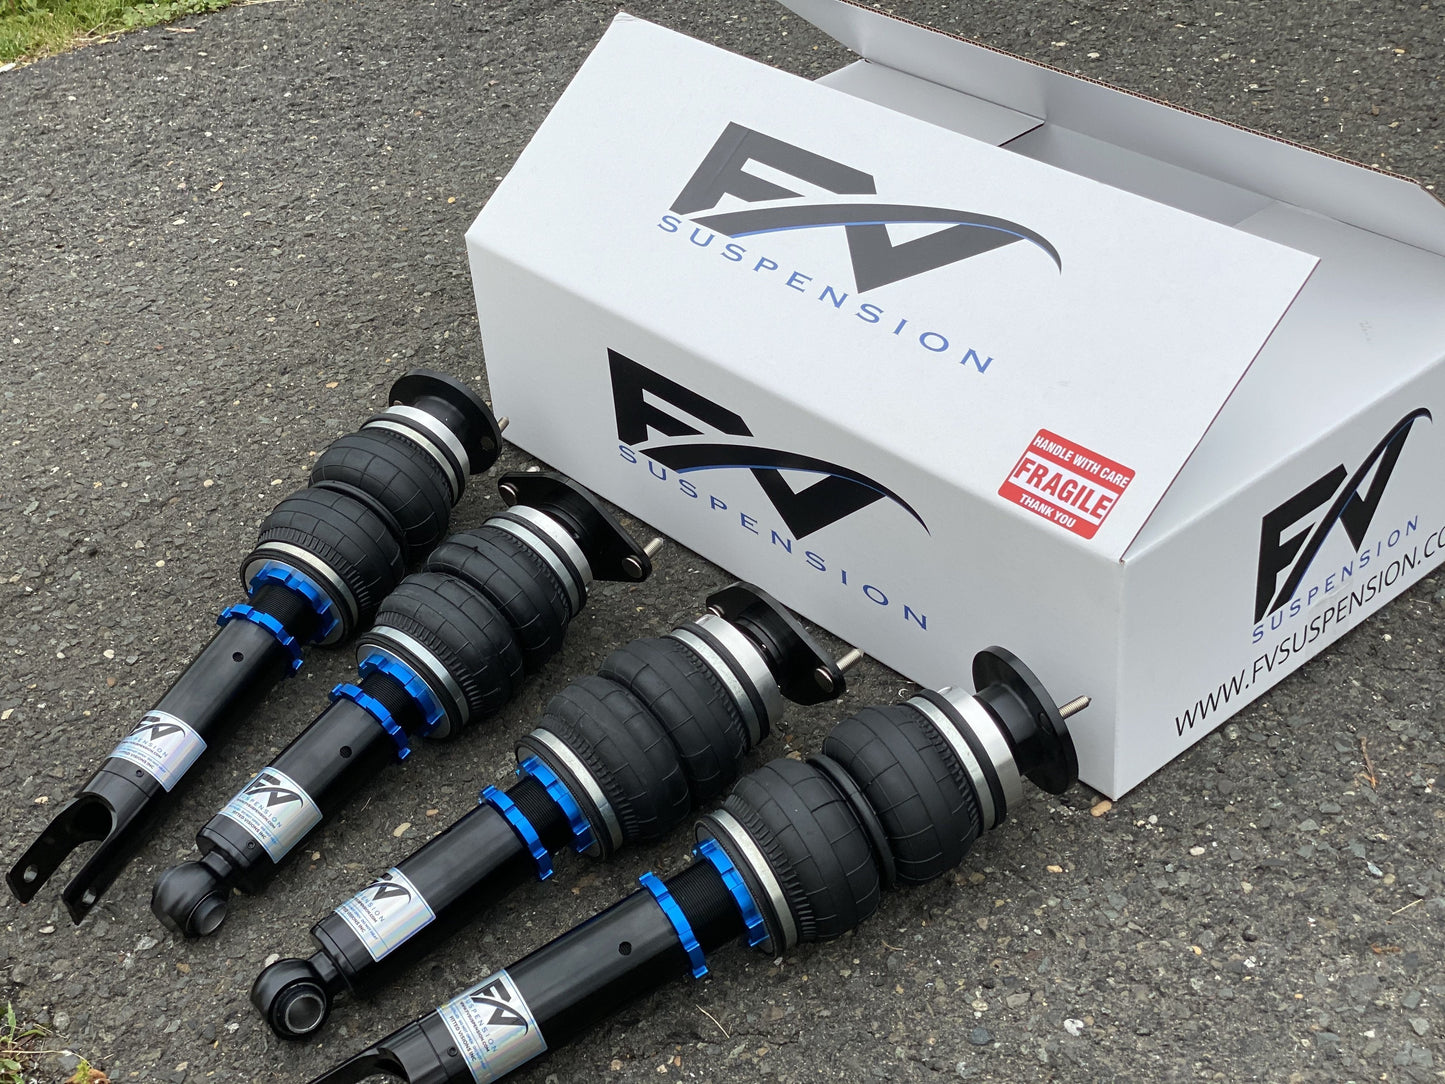 FV Suspension Tier 1 Budget kit Complete Air Ride kit for 04-10 Toyota Sienna XL20 - Full Kit